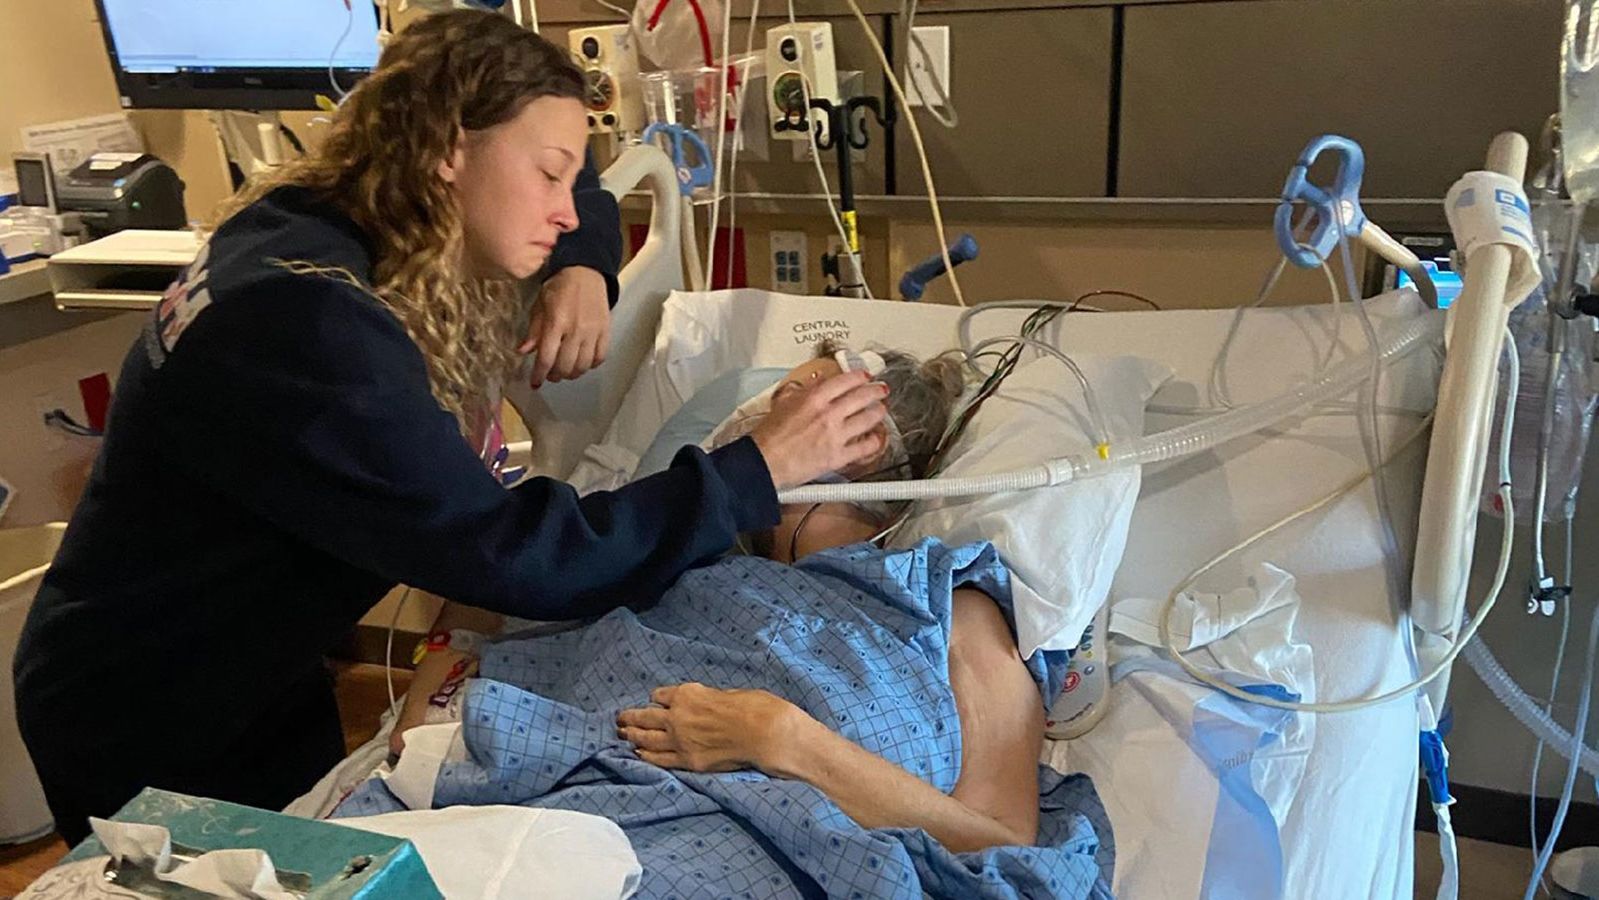 Utah resident Lindsay Wootton tearfully saying farewell to her mother, 56-year-old Tracy Larsen, moments before she lost her life to Covid-19.